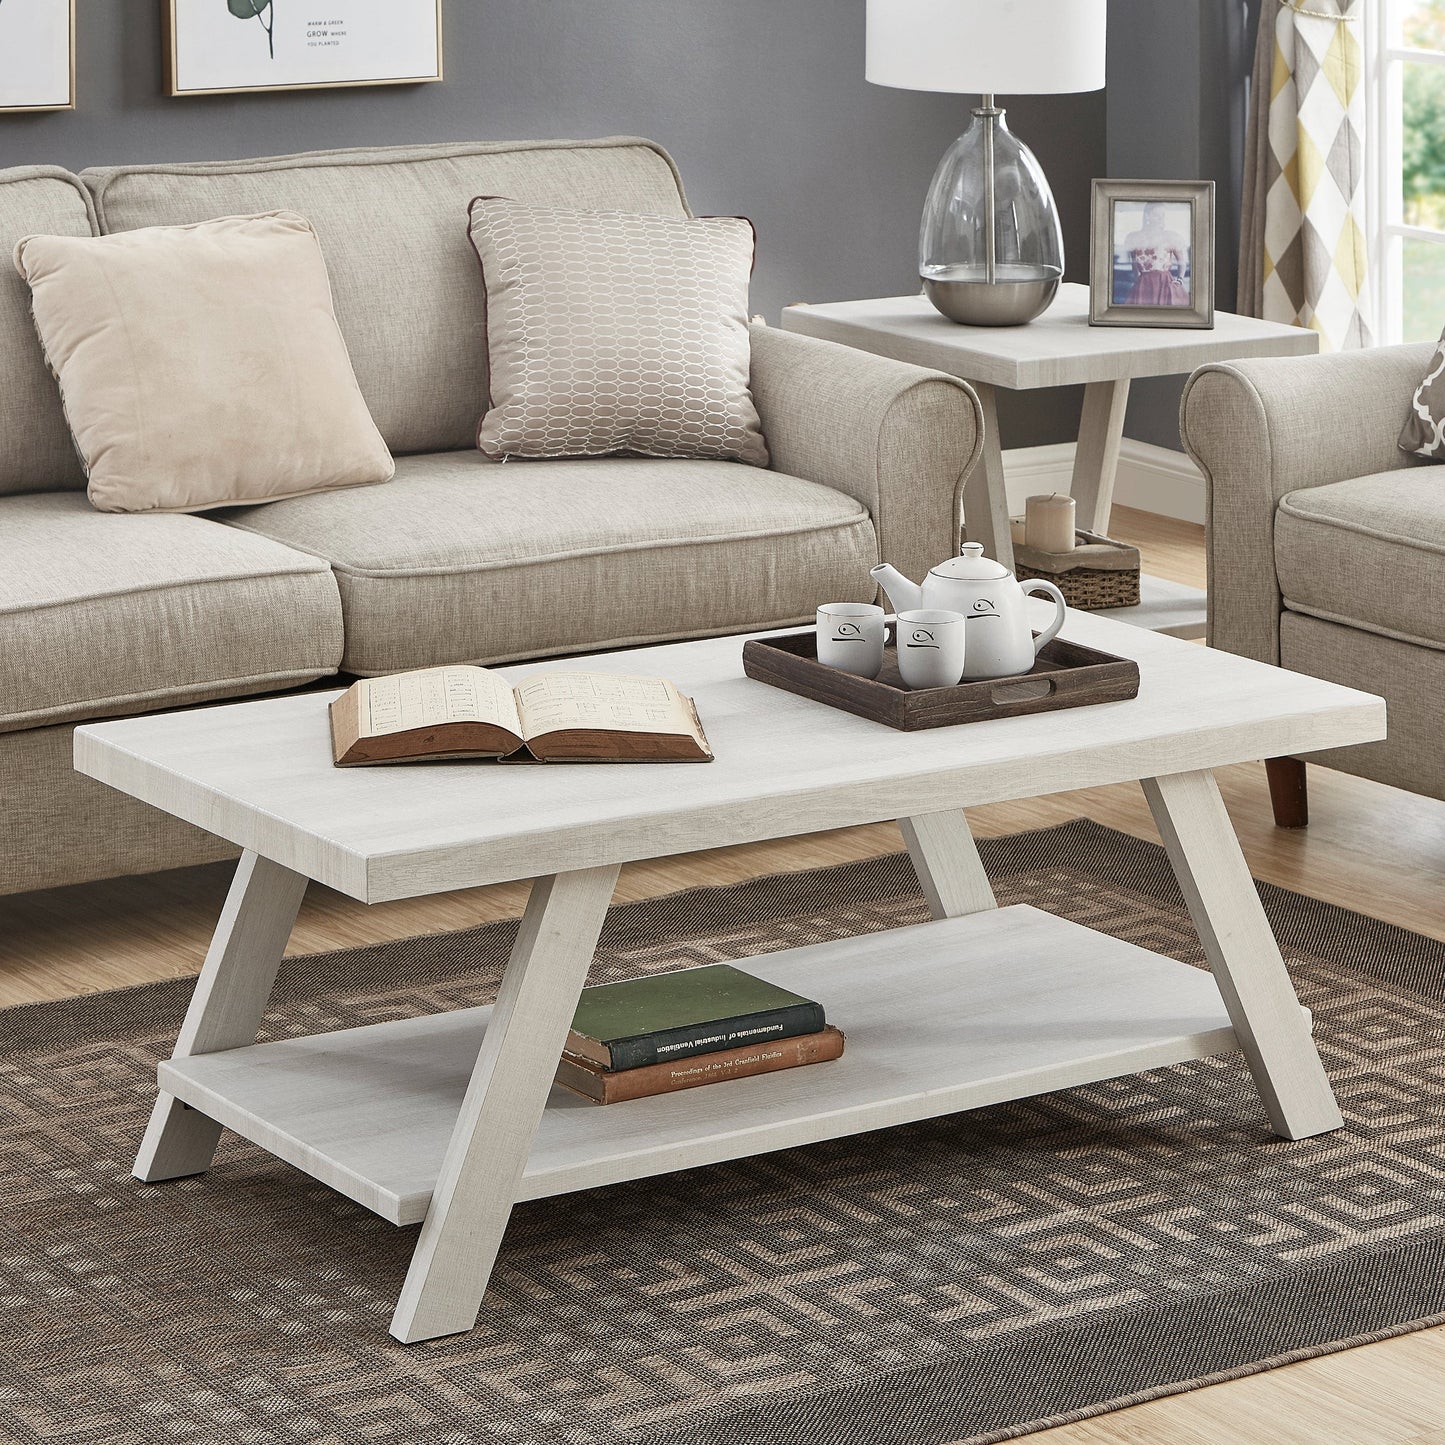 Athens Contemporary Wood Shelf Coffee Table in White Finish